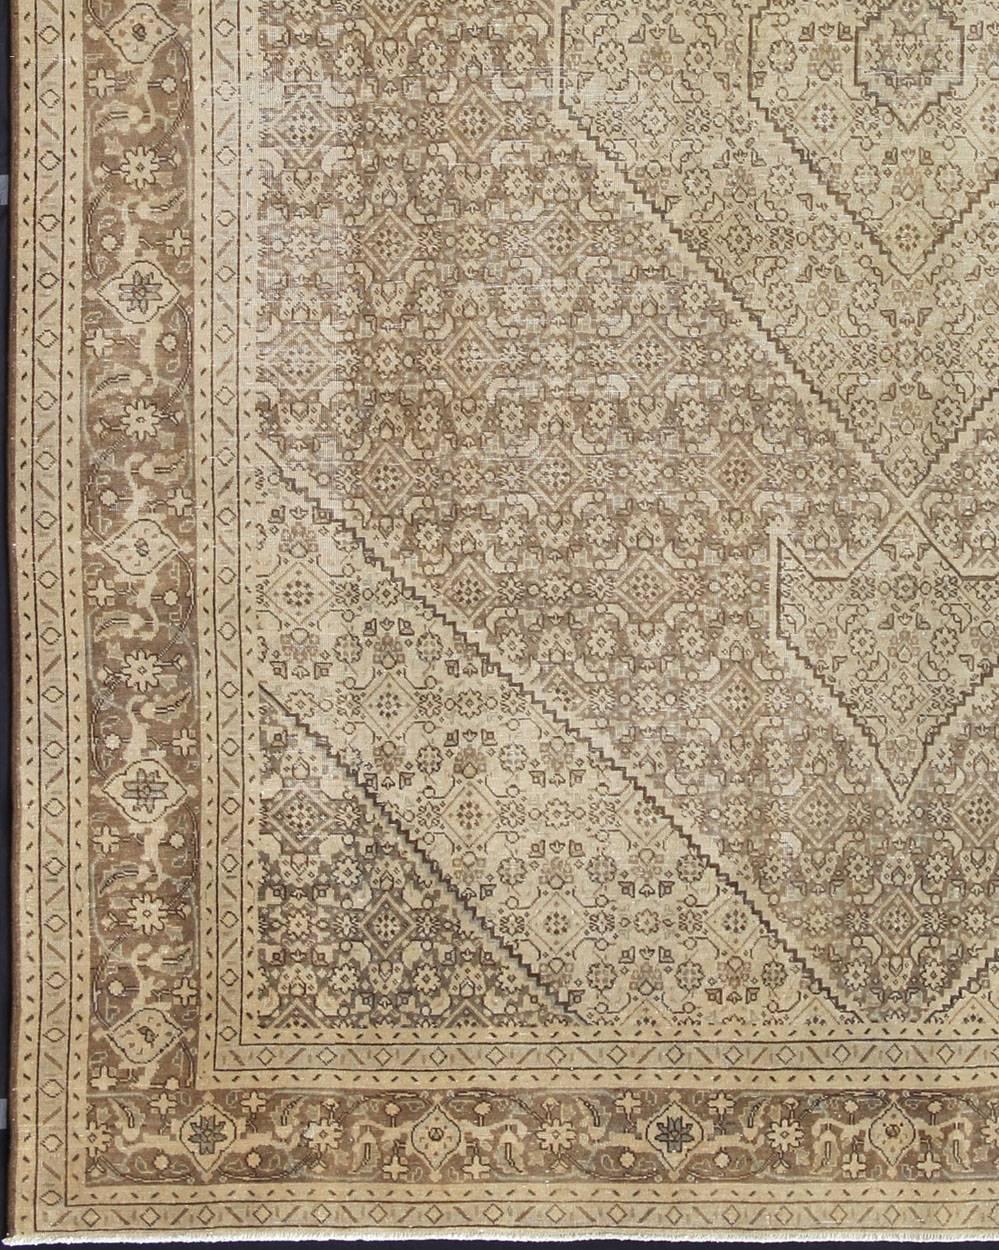 Traditional medallion and vine designs are expressed in a muted palette of neutral wheat and taupe hues, with splashes of dark brown punctuating the overall design of this Tabriz rug from the first part of the 20th Century.
Measures: 9'9 x 12'4.